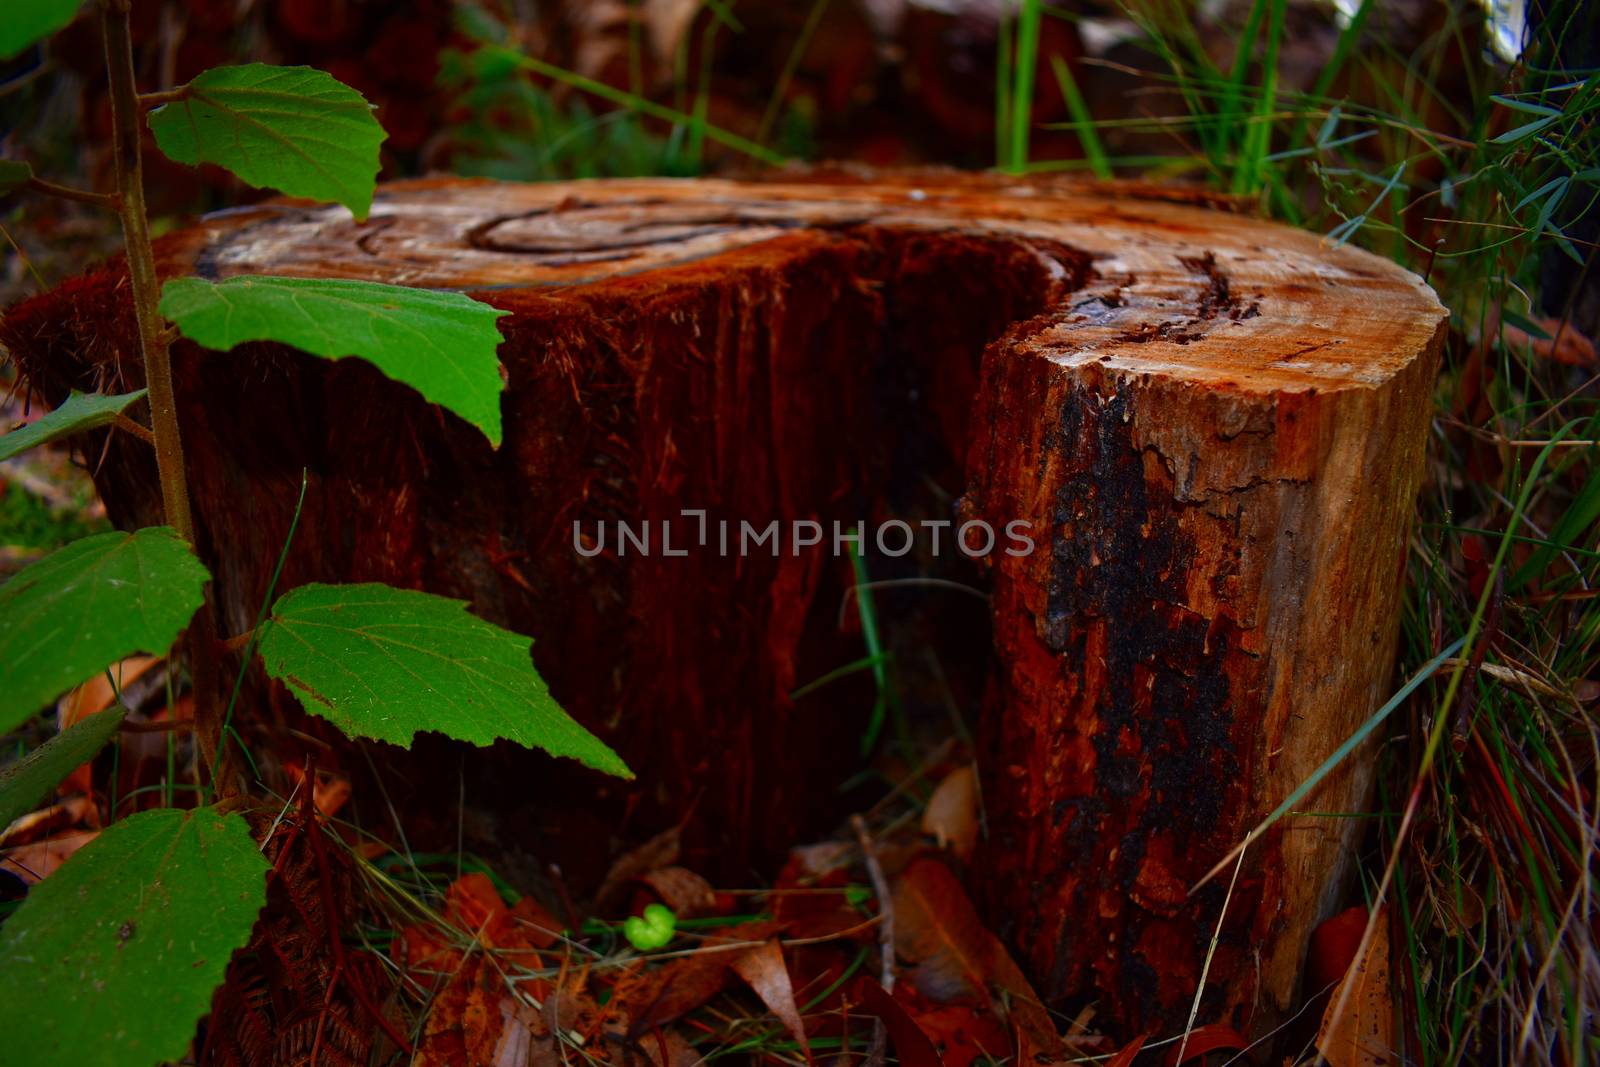 A tree stump in a curled pattern